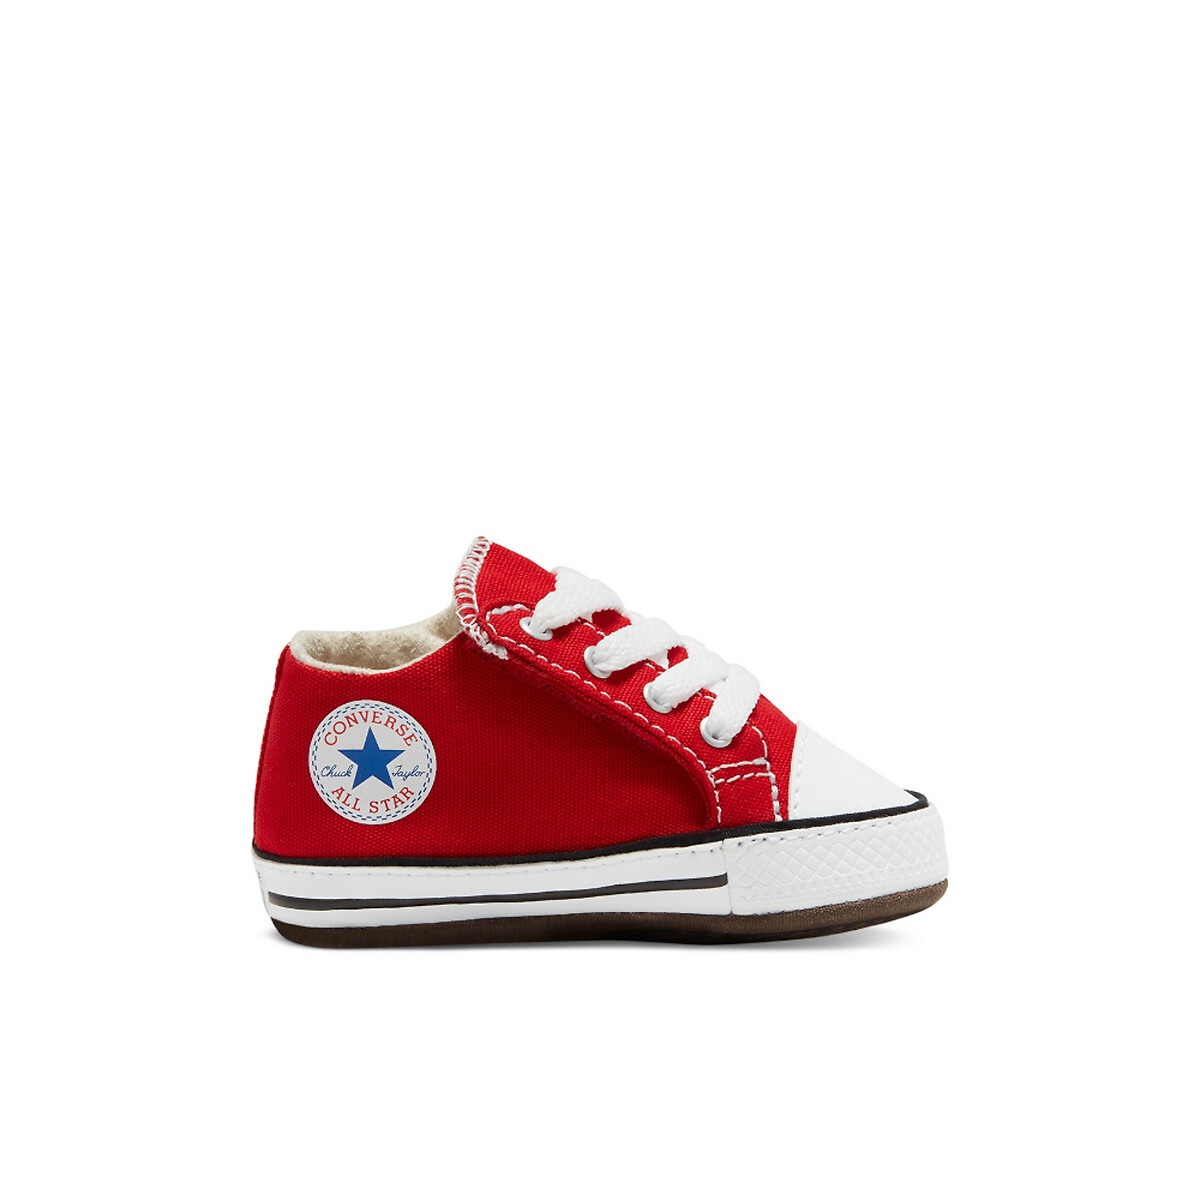 Image of Kids Cribster Canvas Chuck Taylor All Star